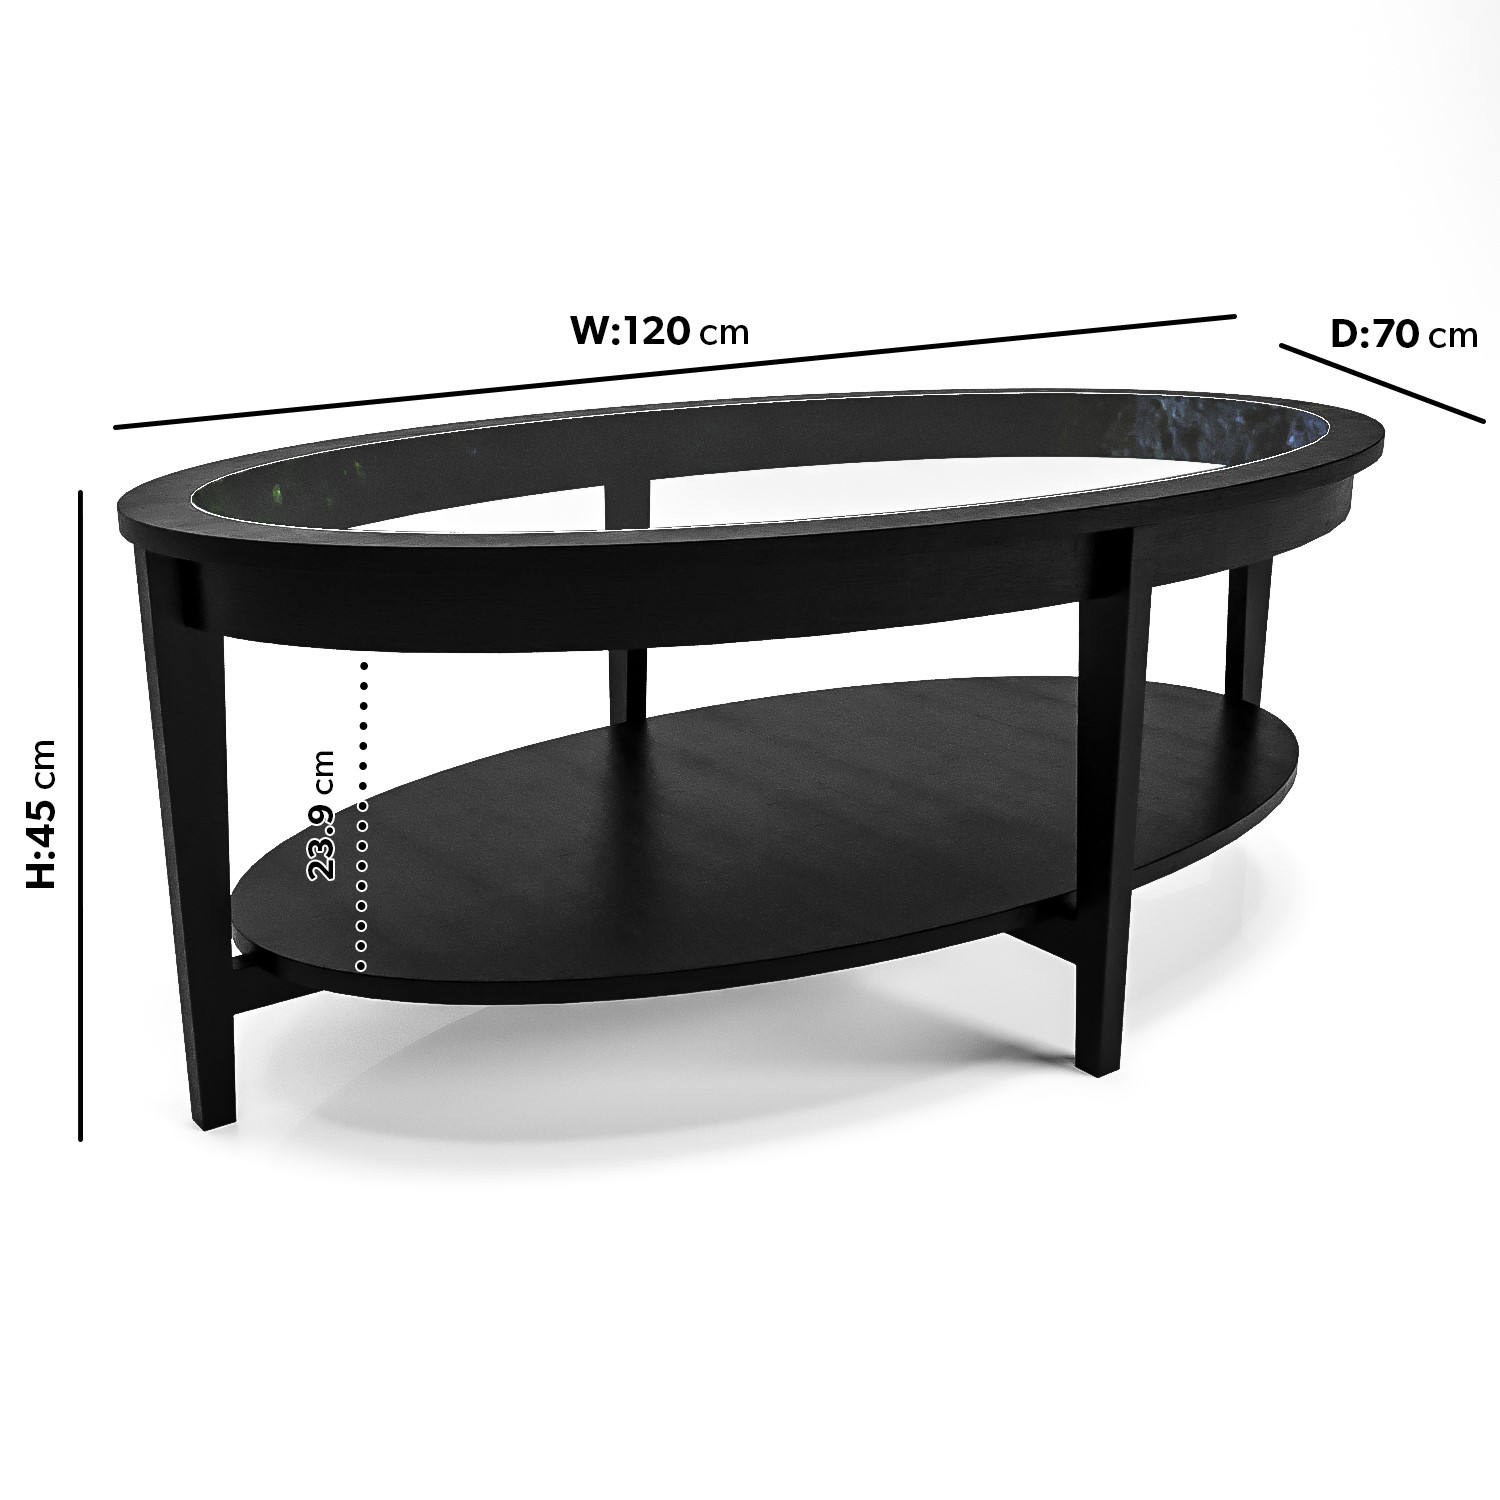 Read more about Large oval black wood coffee table with glass top toula